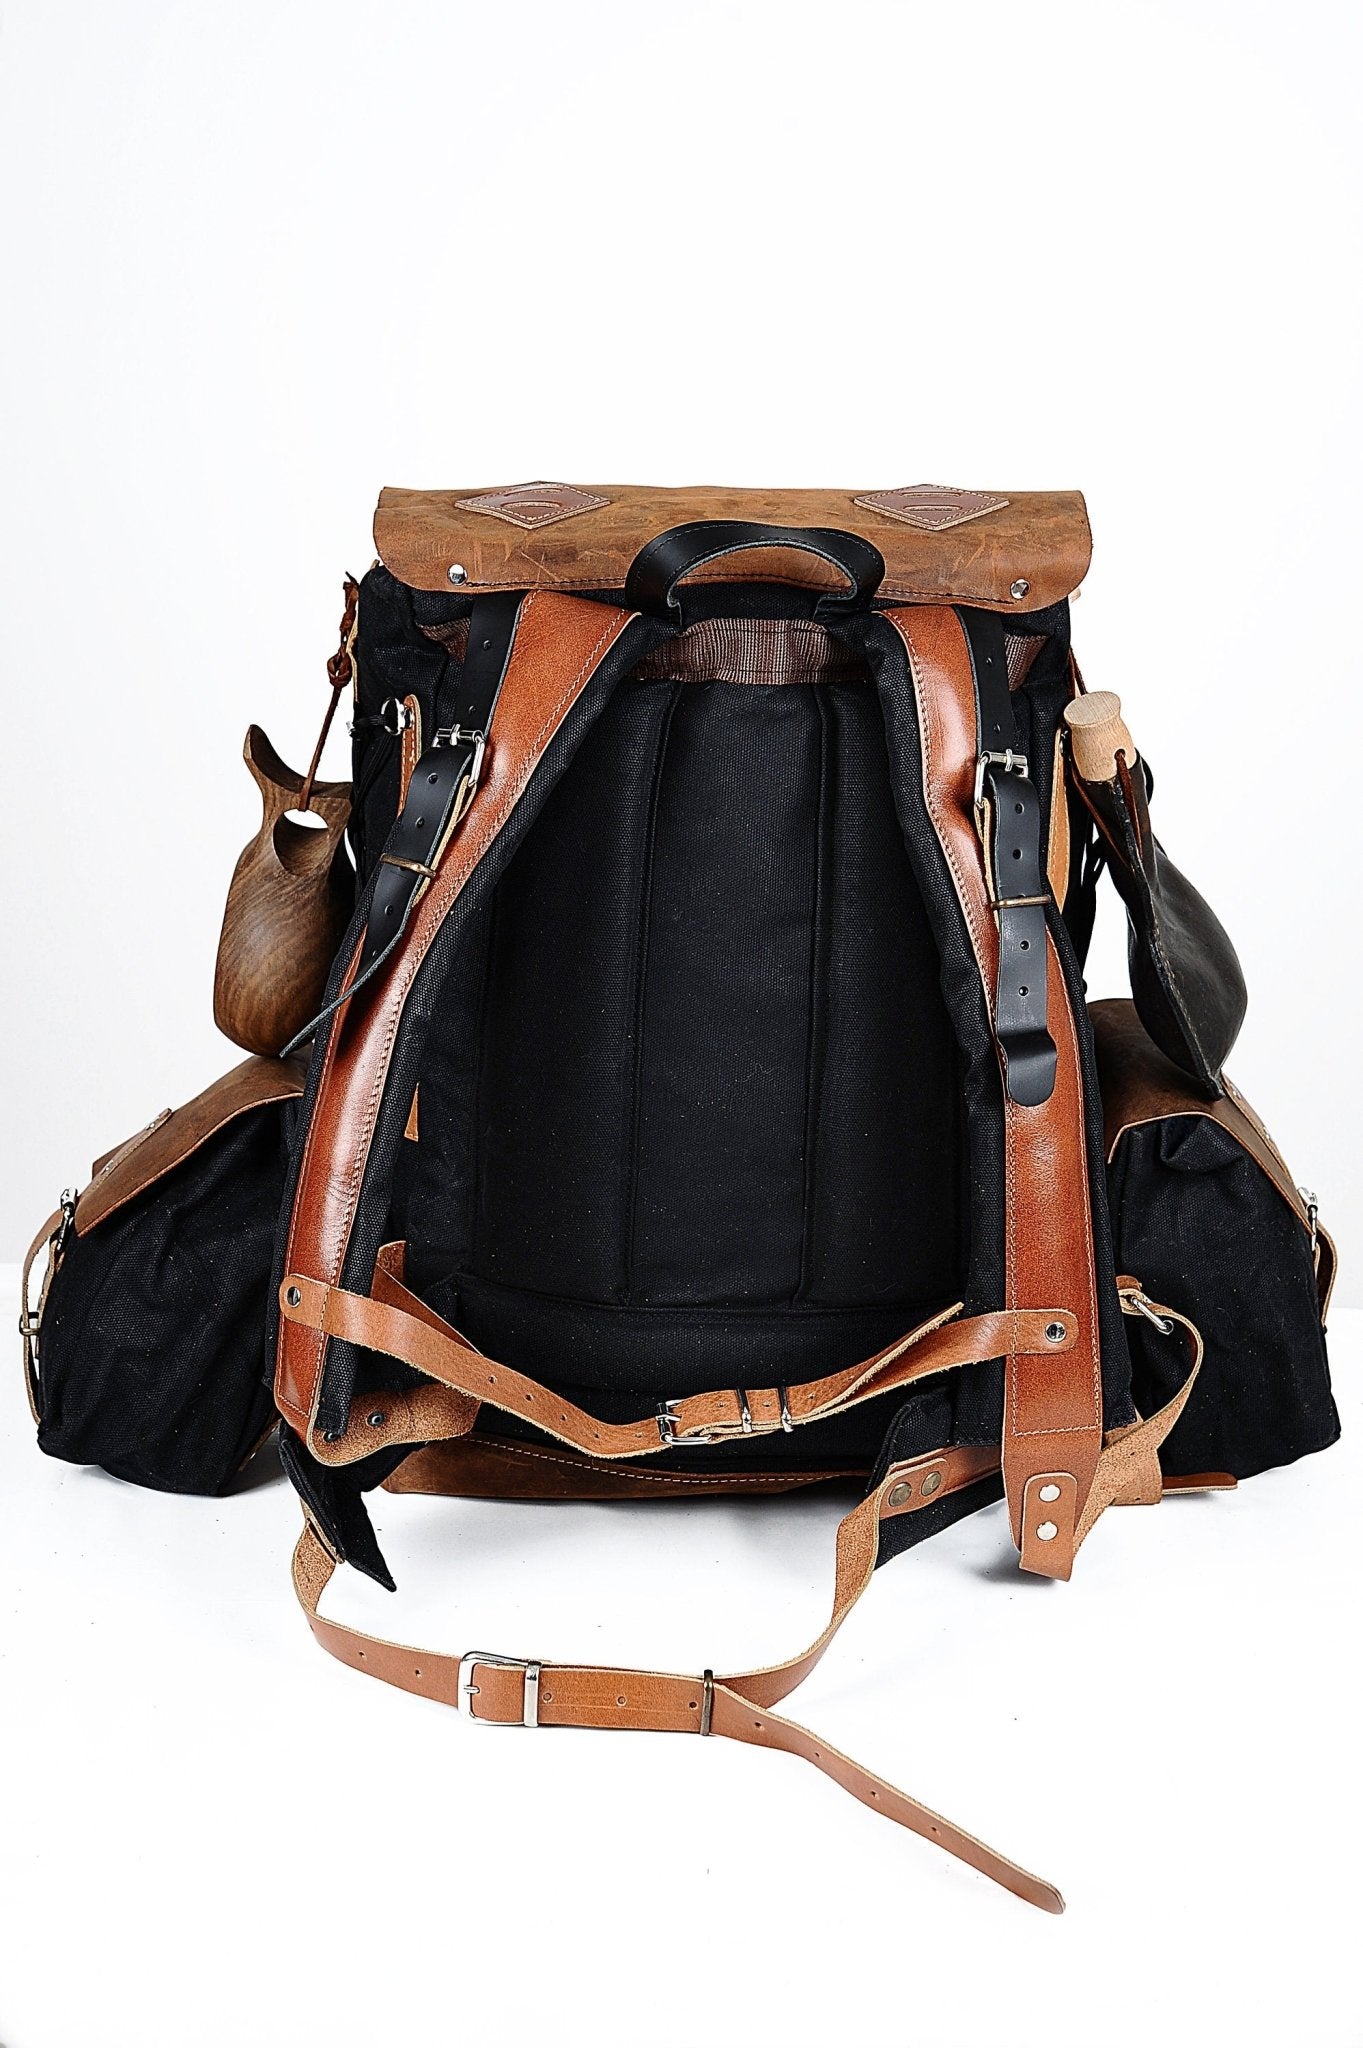 Limited Camping Backpack with 2 detachable side bag  30 Liter to 80 liter options Black Brown Green Options  99percenthandmade   